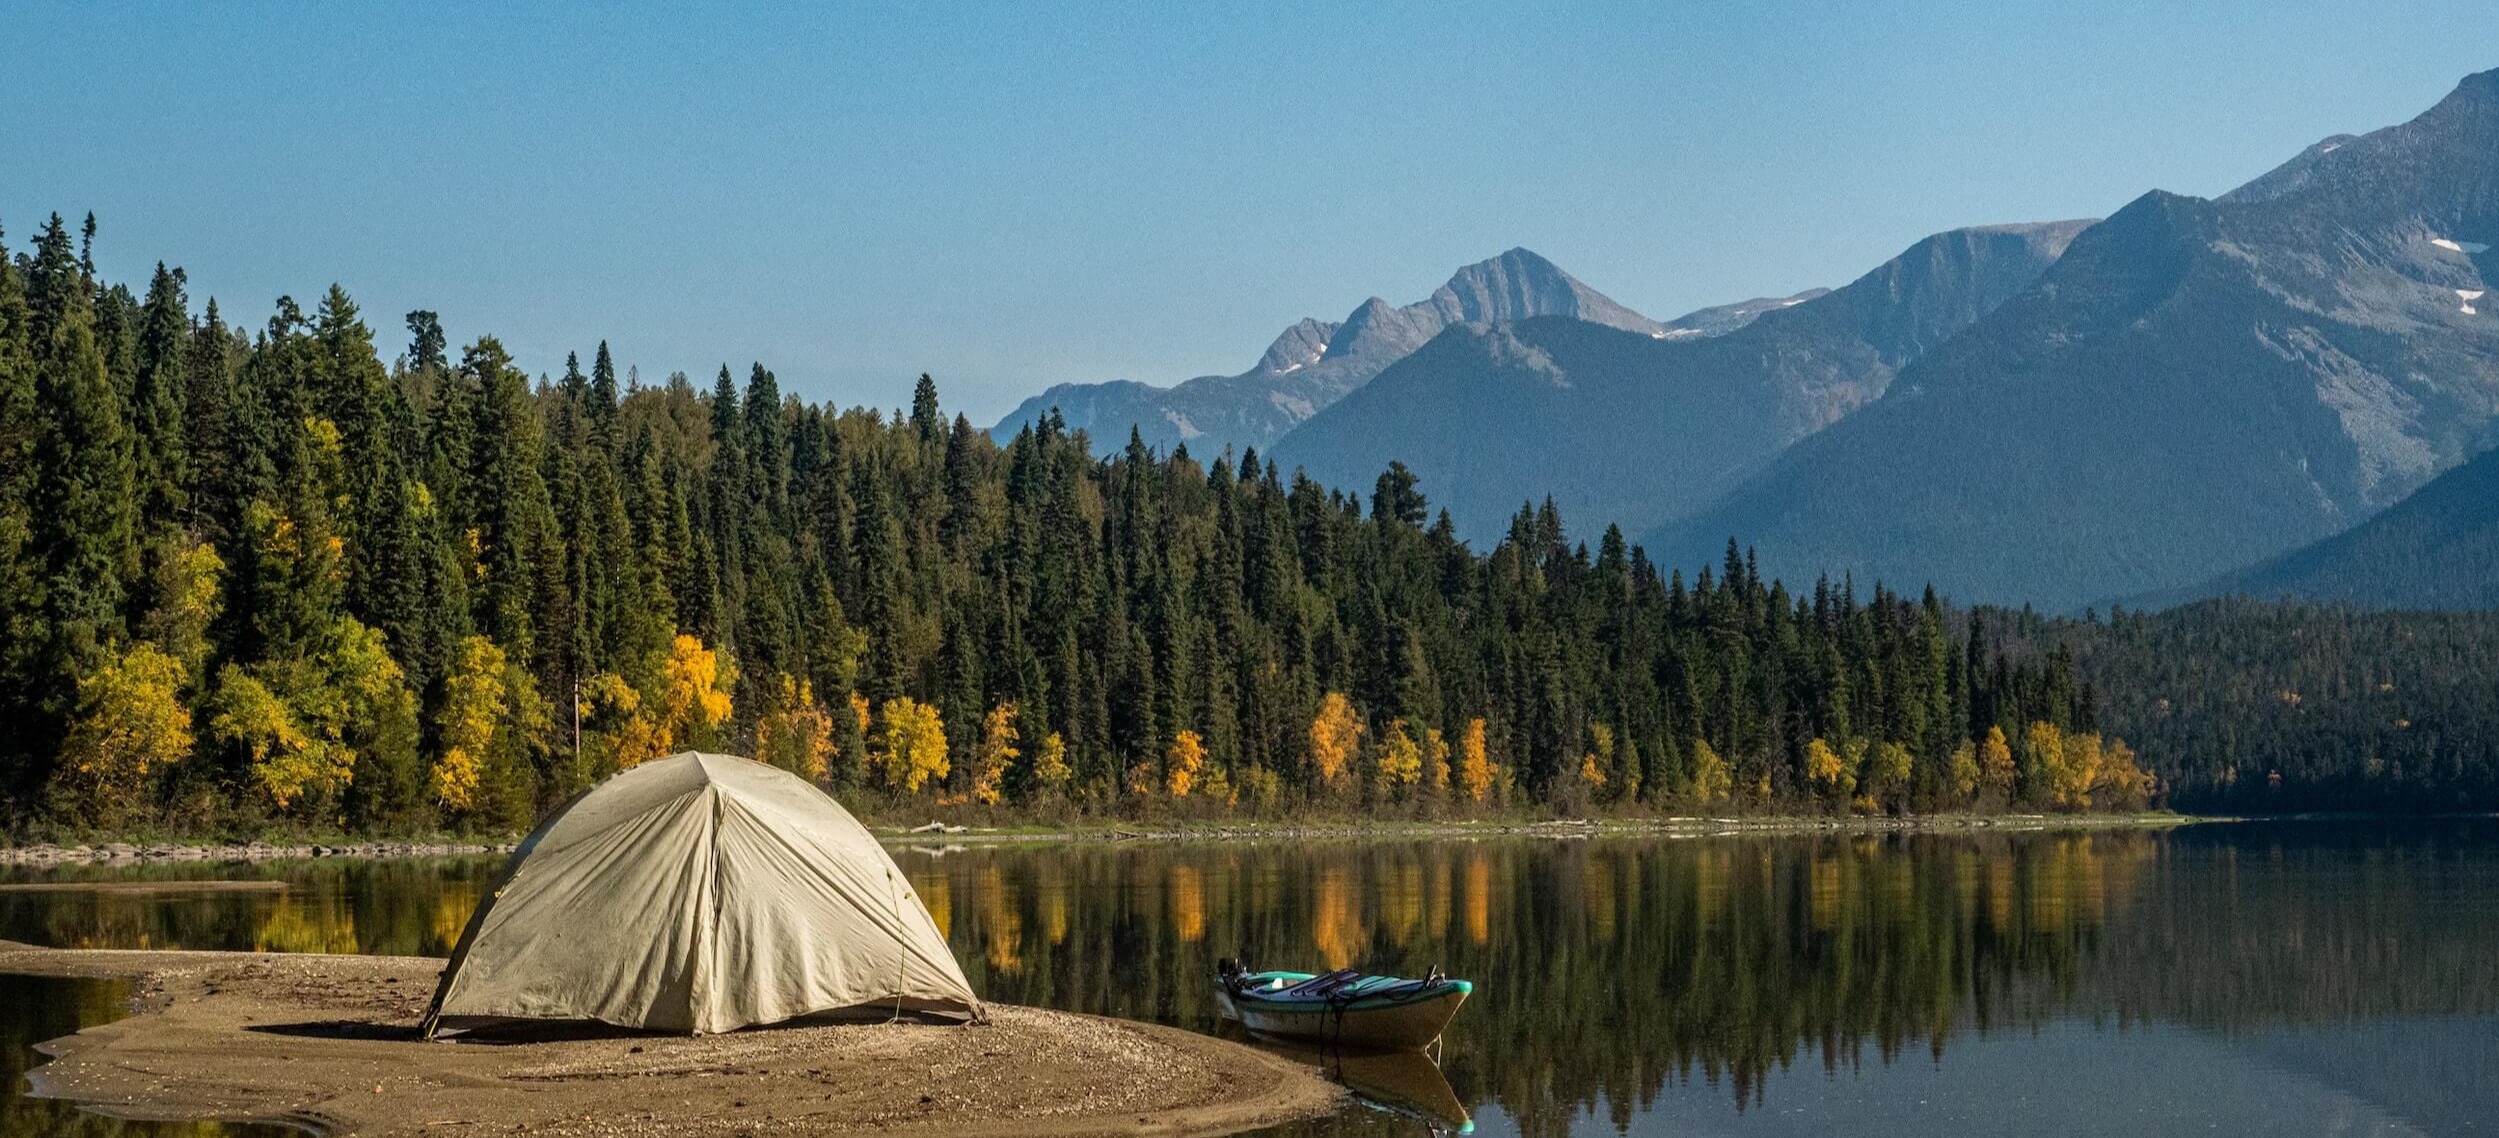 Camping tent in mountainous nature by a lake